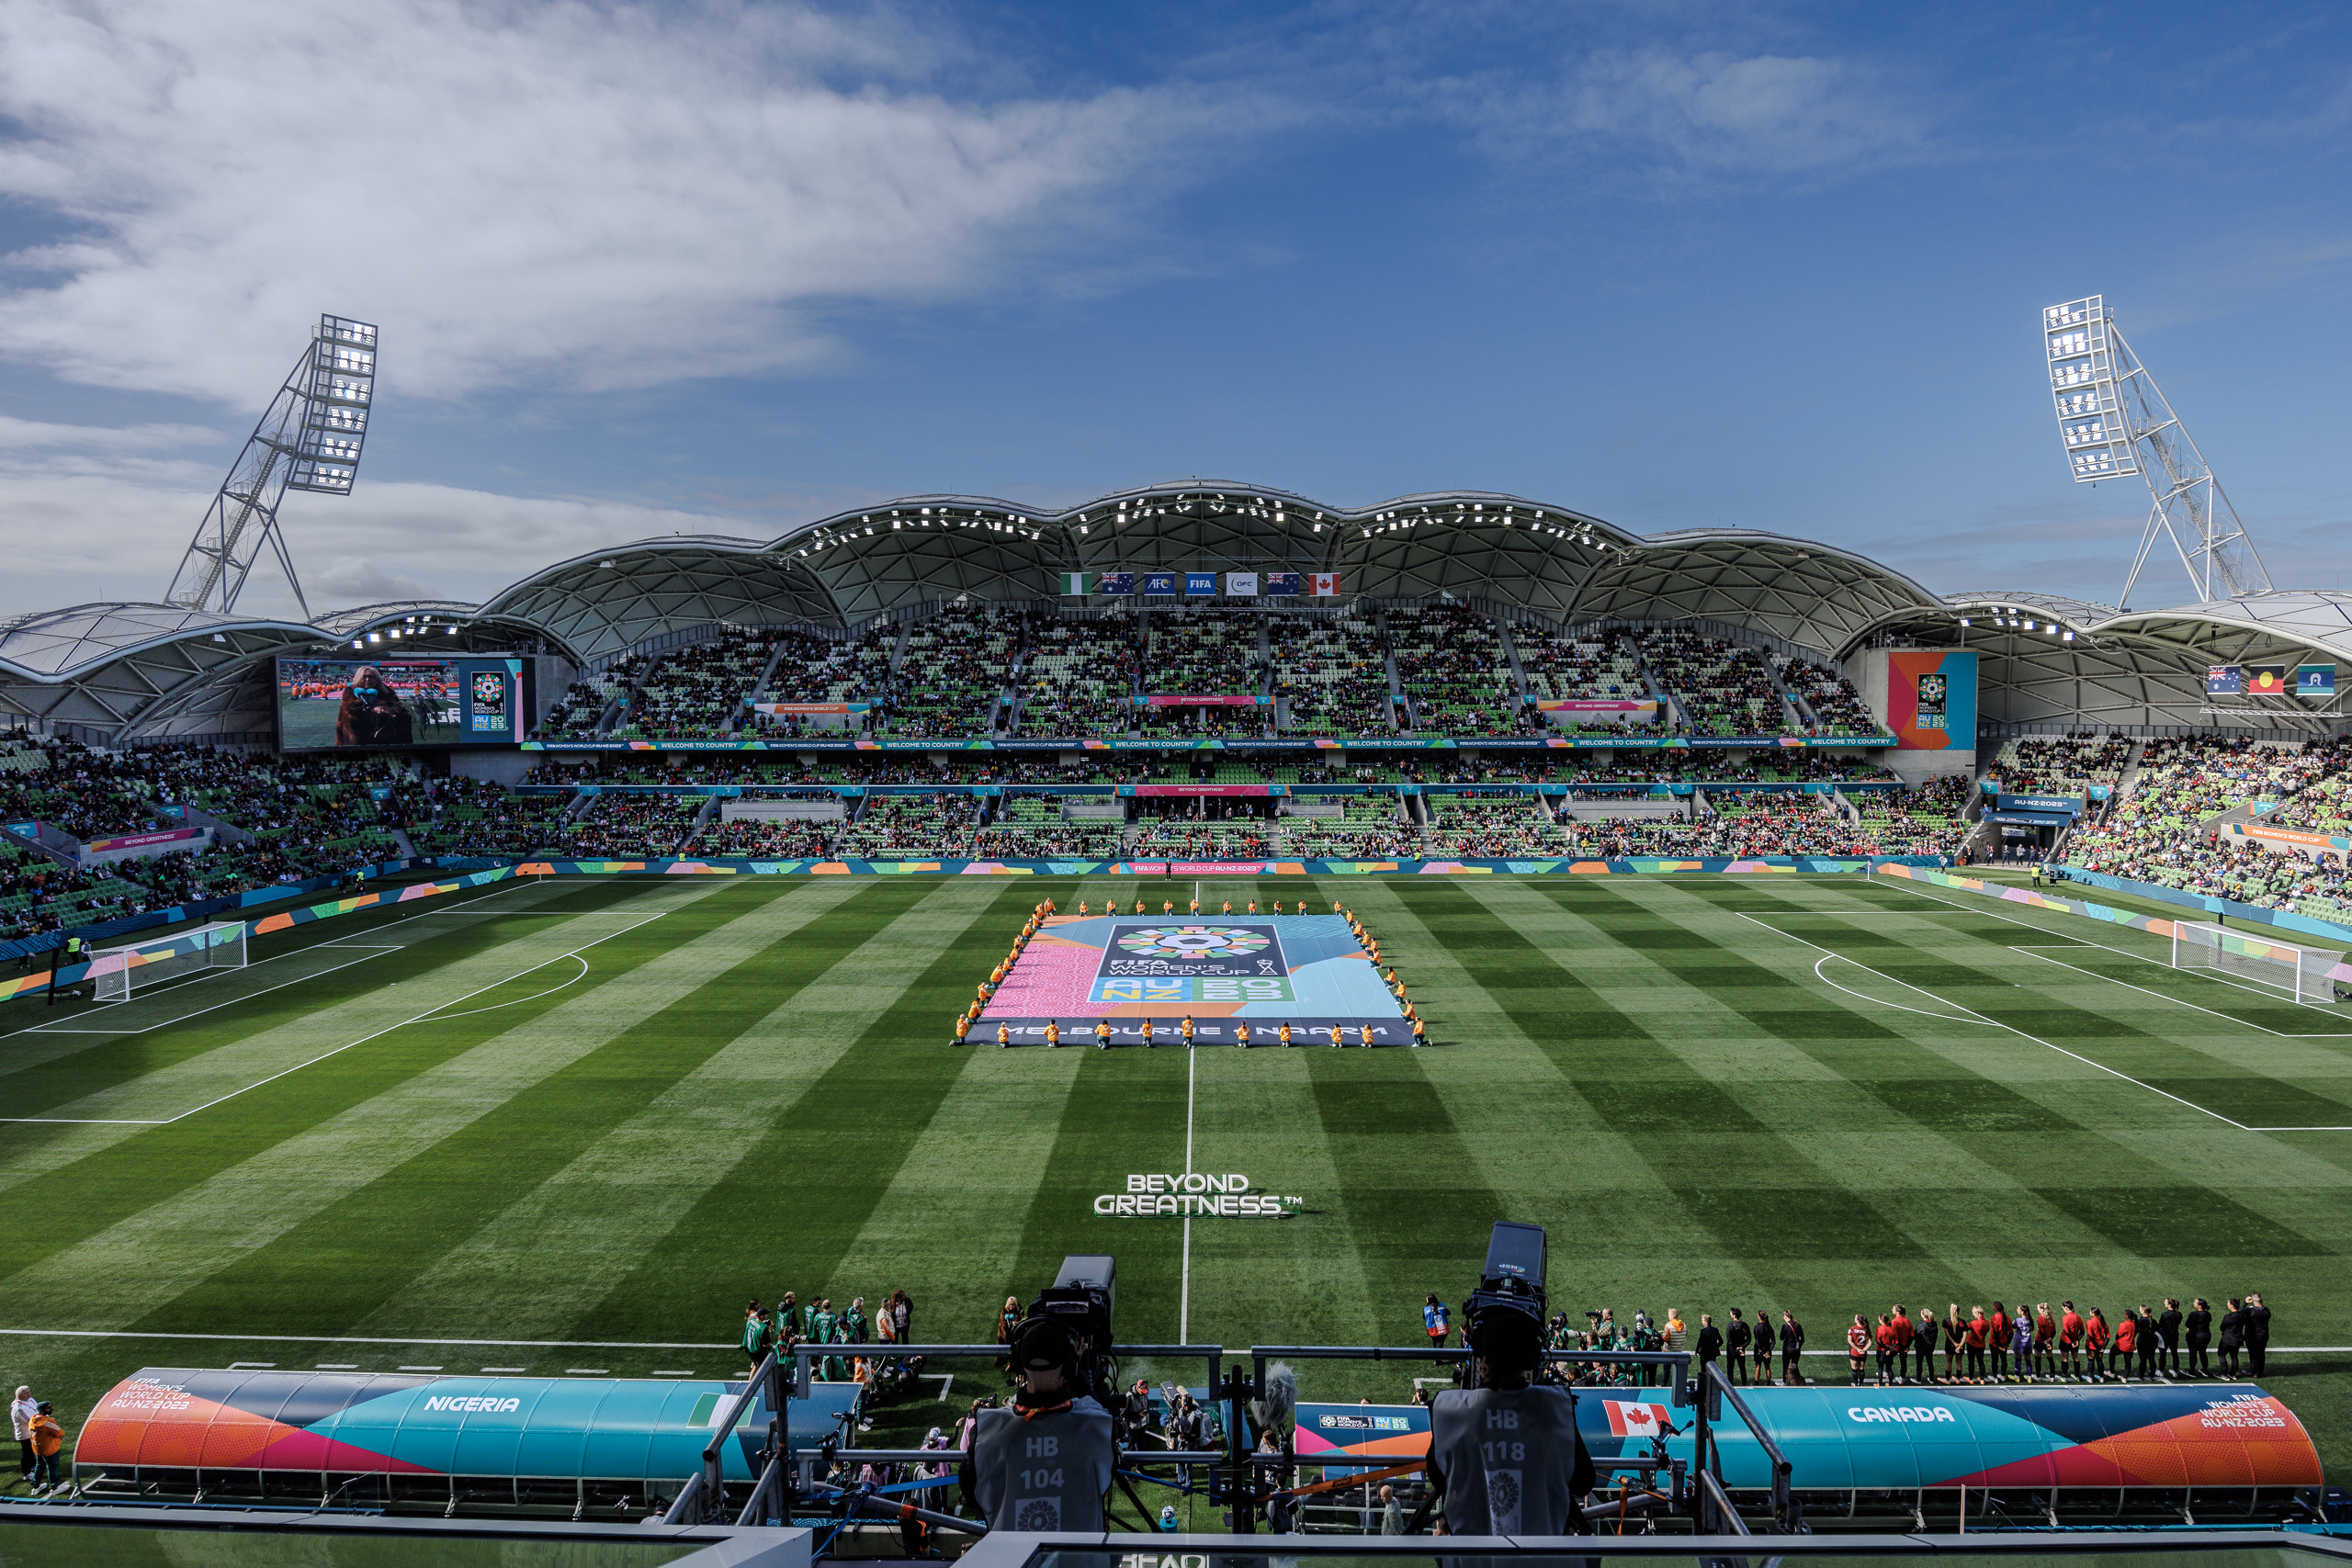 MELBOURNE - July 21, 2023: A view of the Melbourne Rectangular Stadium prior to the start of the first match in Melbourne at the 2023 Women's World Cup group B match between Nigeria and Canada. 20230721_SL5_8119